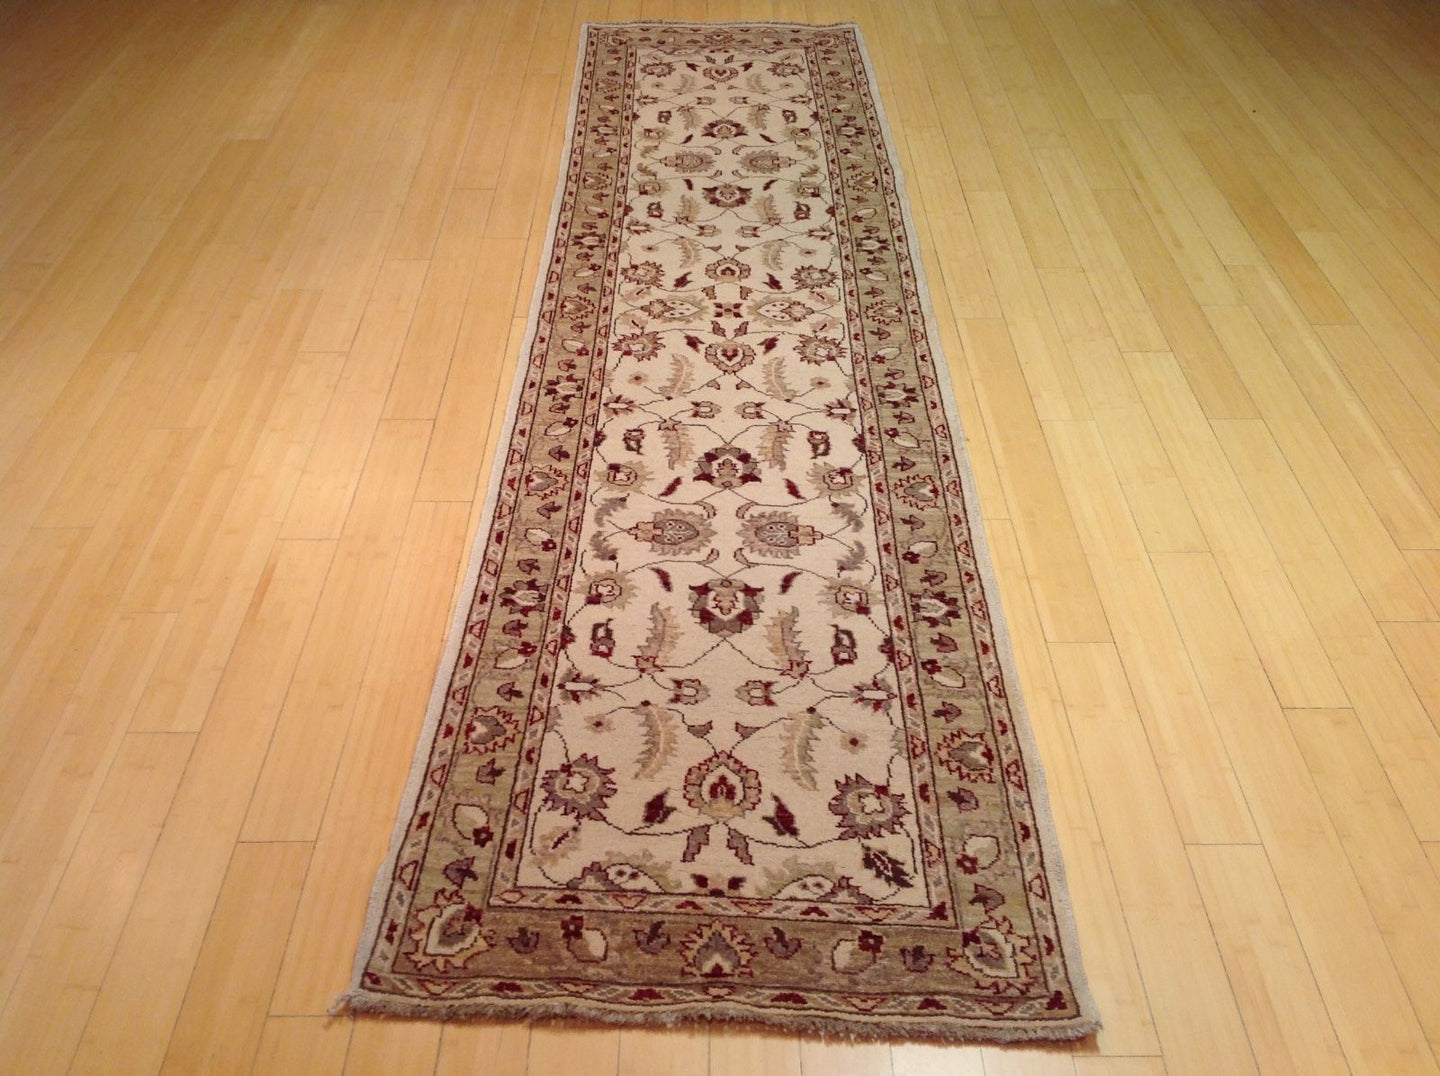 Oriental rugs, hand-knotted carpets, sustainable rugs, classic world oriental rugs, handmade, United States, interior design,  Brral-1524